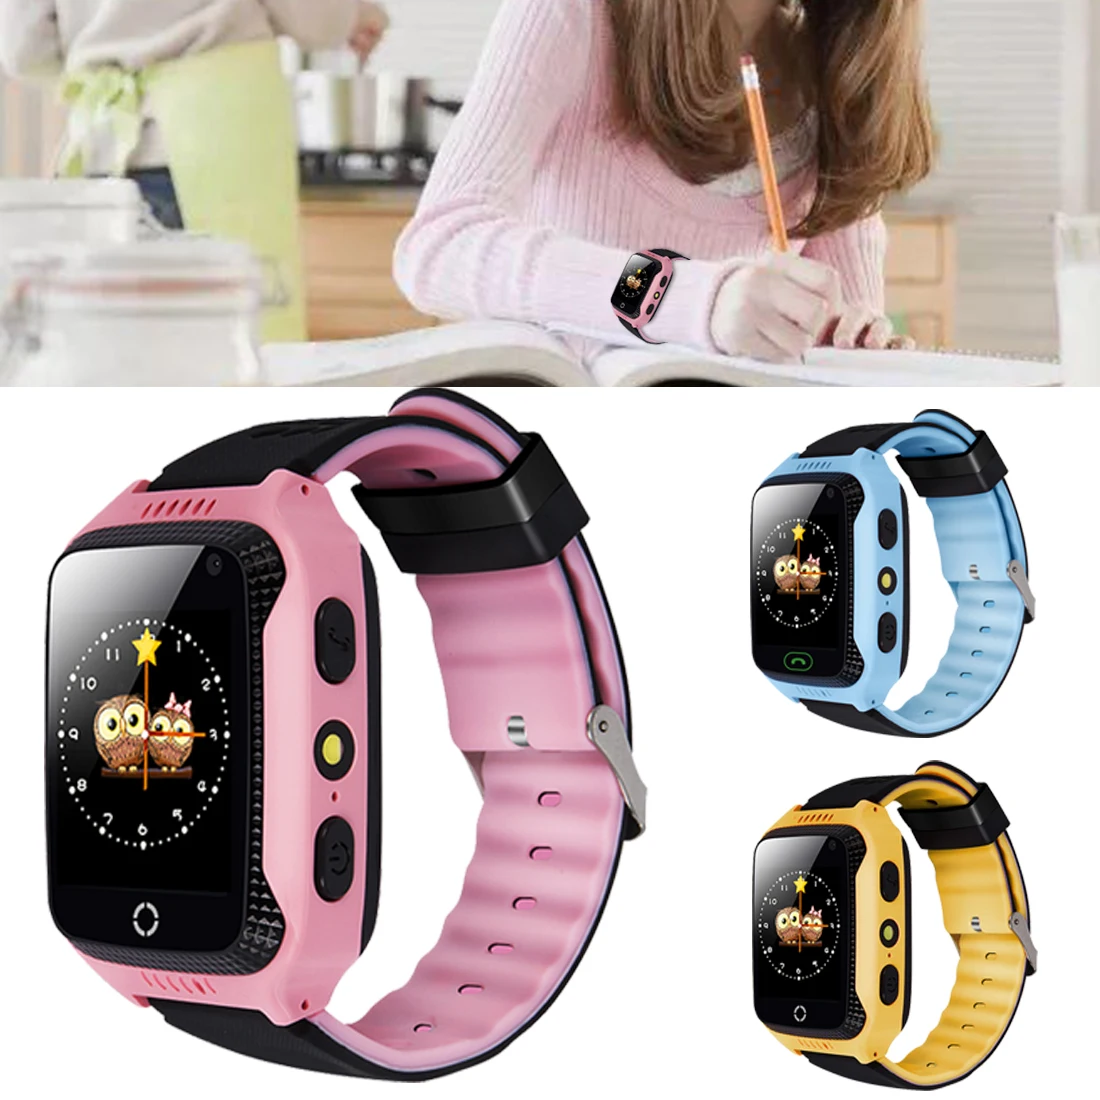 

Child GPS Tracker Smart Watch Q529 Support Hebrew Flashlight Camera 1.44" Touch Screen GPS LBS SOS Call Location Baby Watch Q529